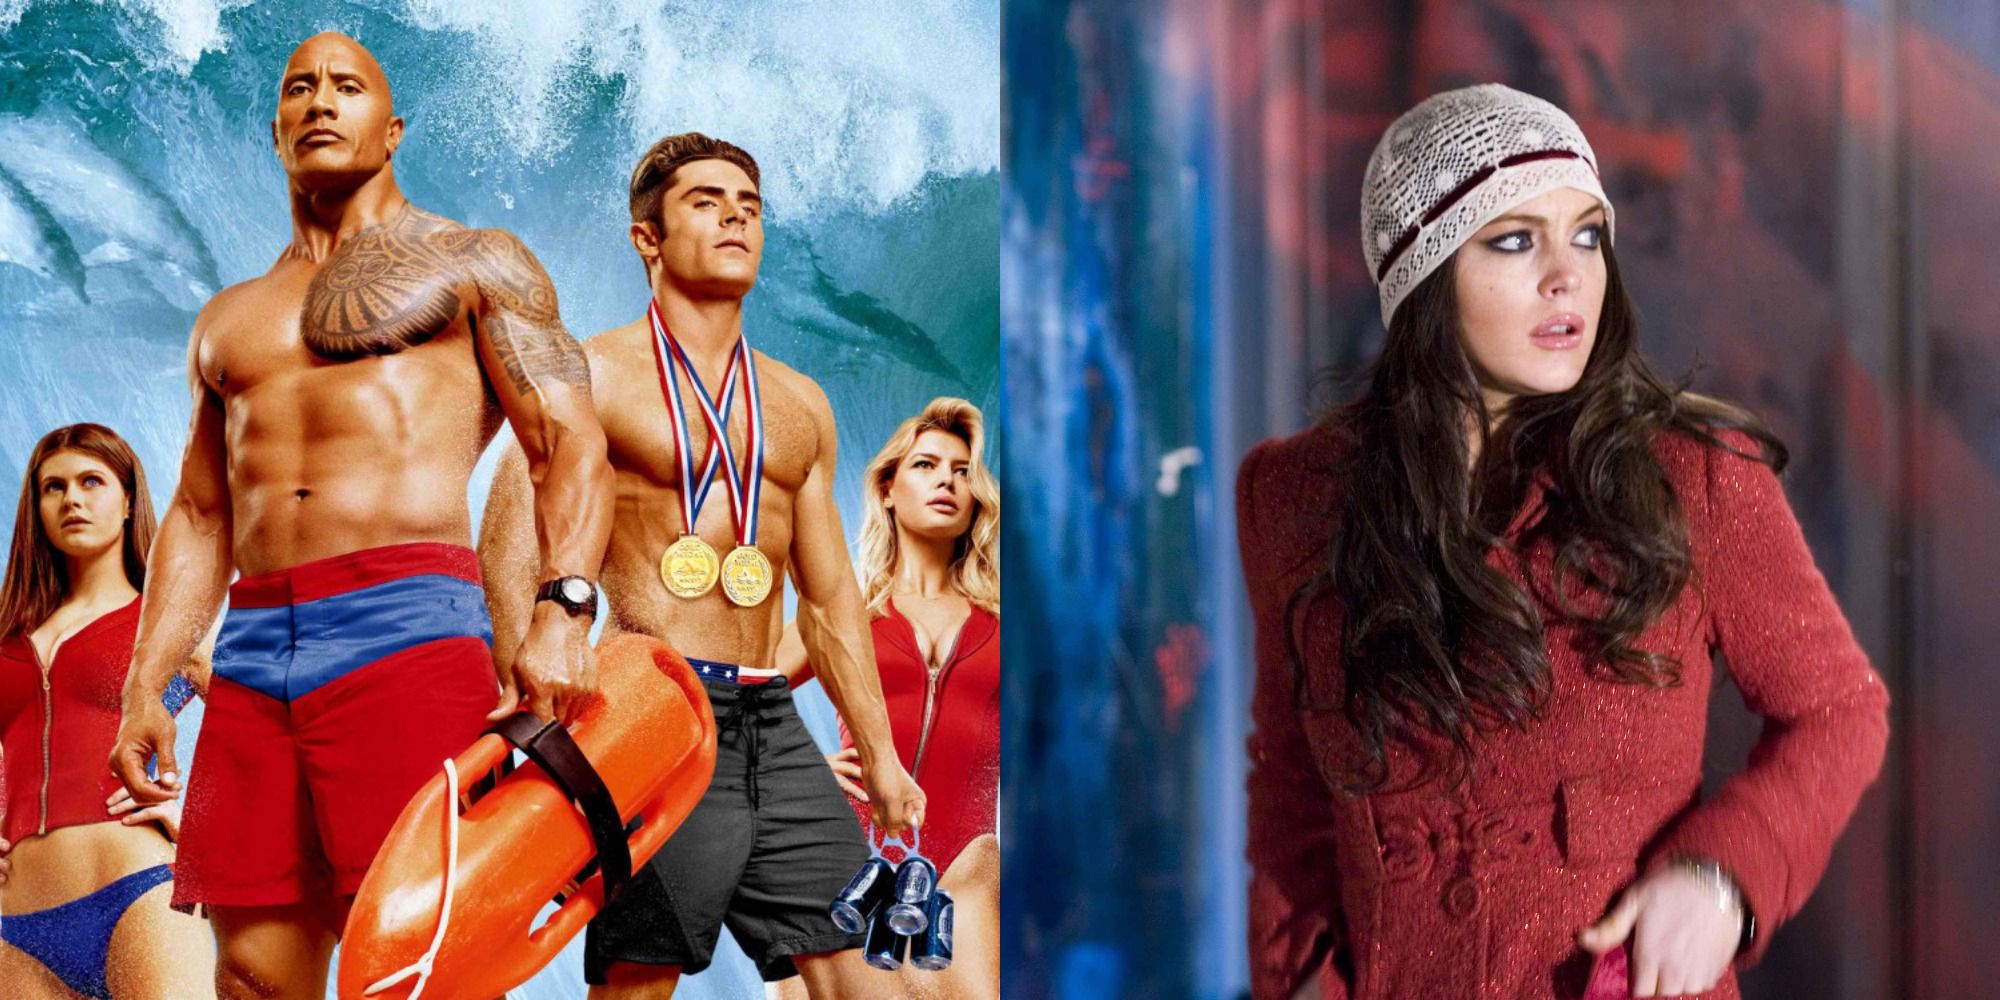 Split image showing the cast of Baywatch and Lindsay Lohan in I Know Who Killed Me